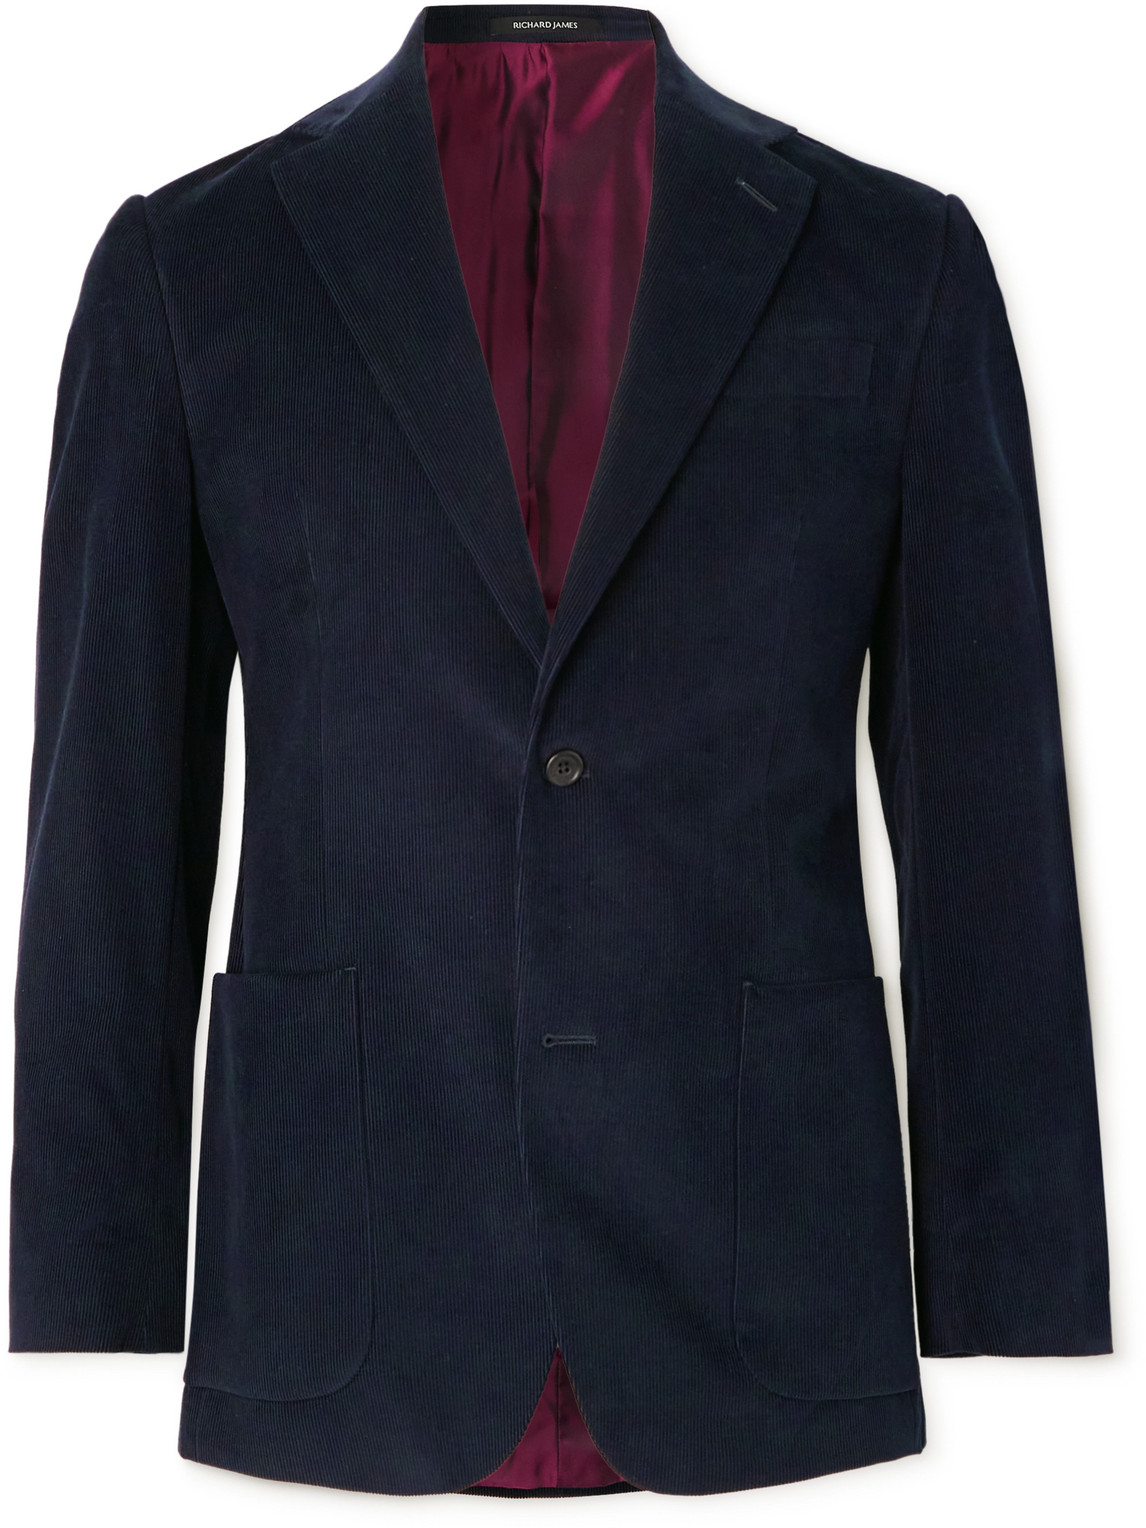 Slim-Fit Double-Breasted Cotton-Needlecord Suit Jacket